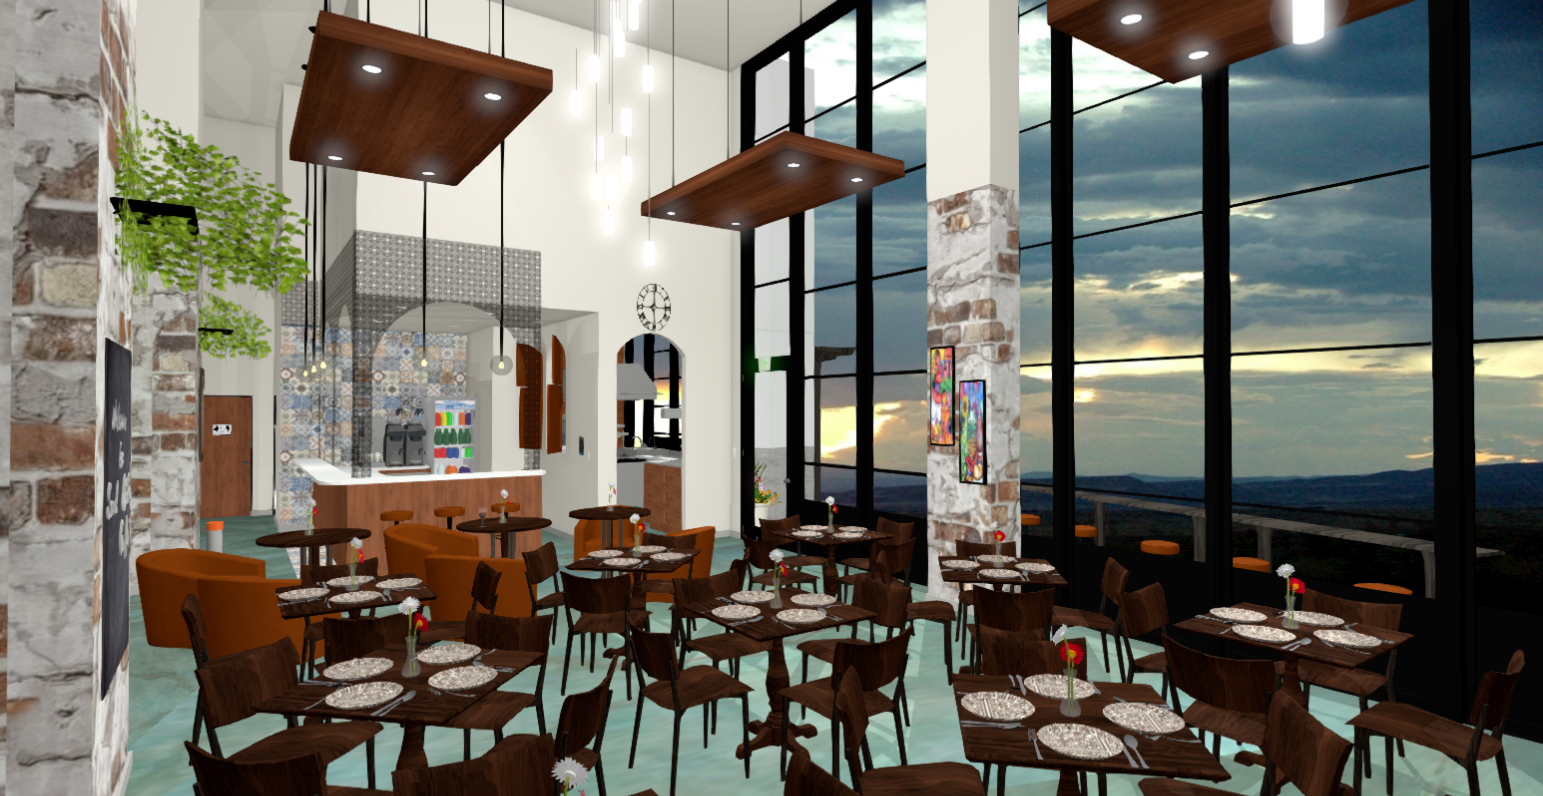 An animated render of the new Soul de Cuba restaurant dining room with dark wooden chairs and tables, bright lights and modern chandeliers, and white and aqua coloured accents, designed by Creative Touch Interiors.